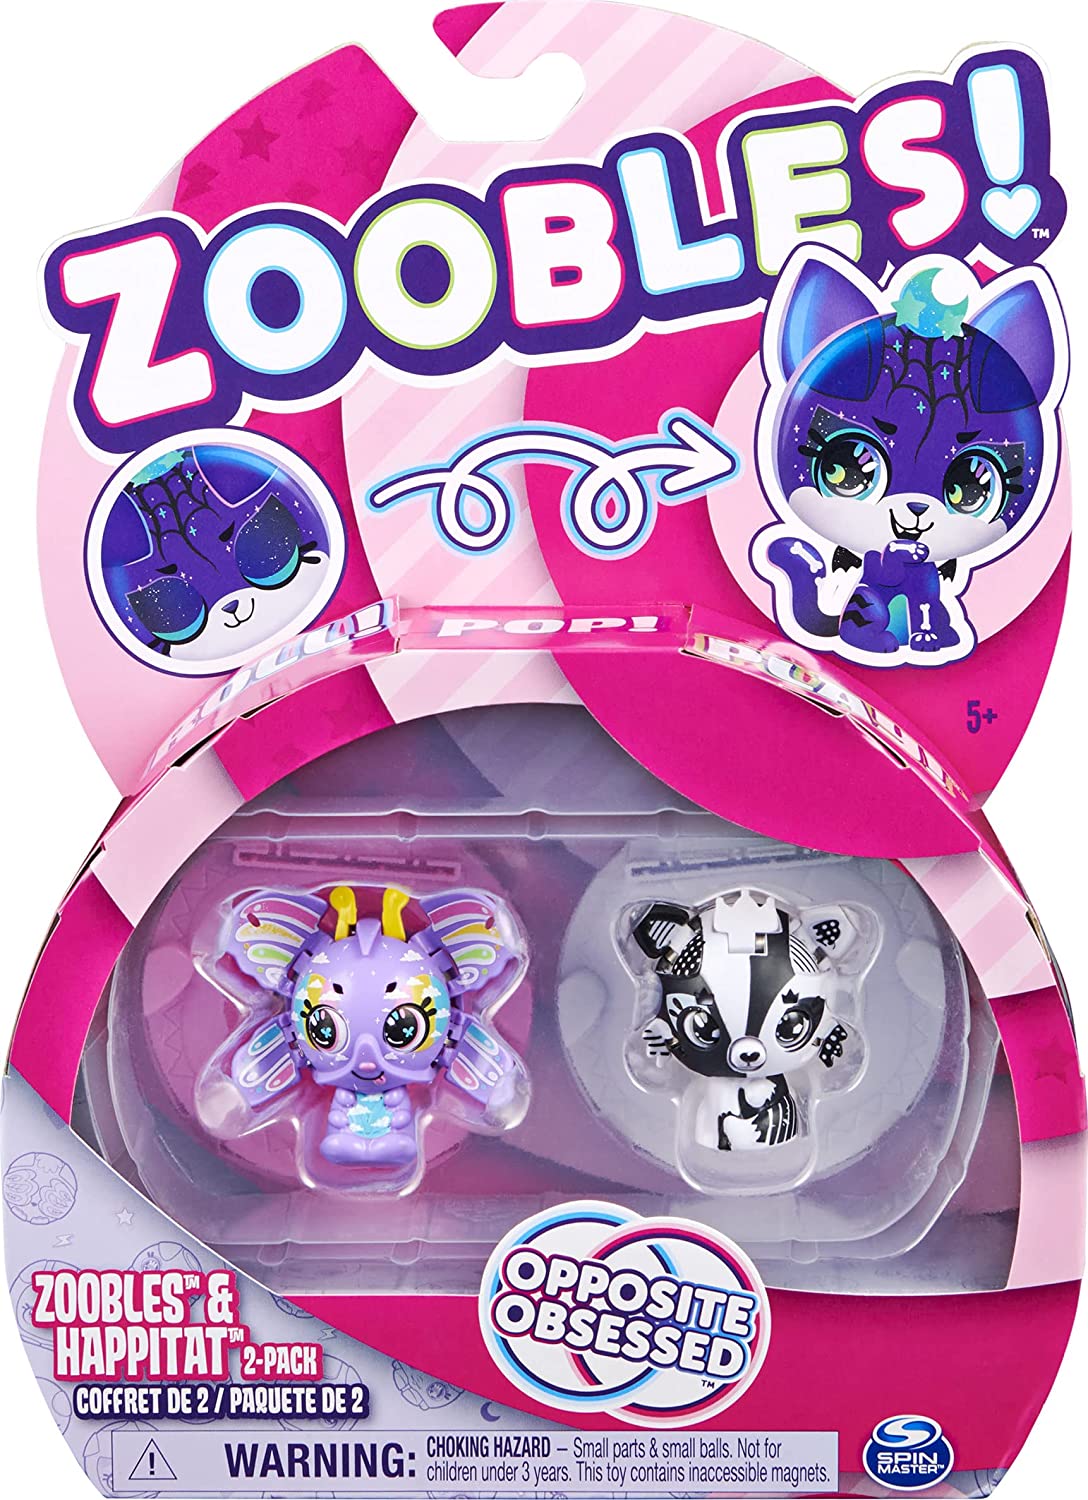 Zoobles Animal 2 pack